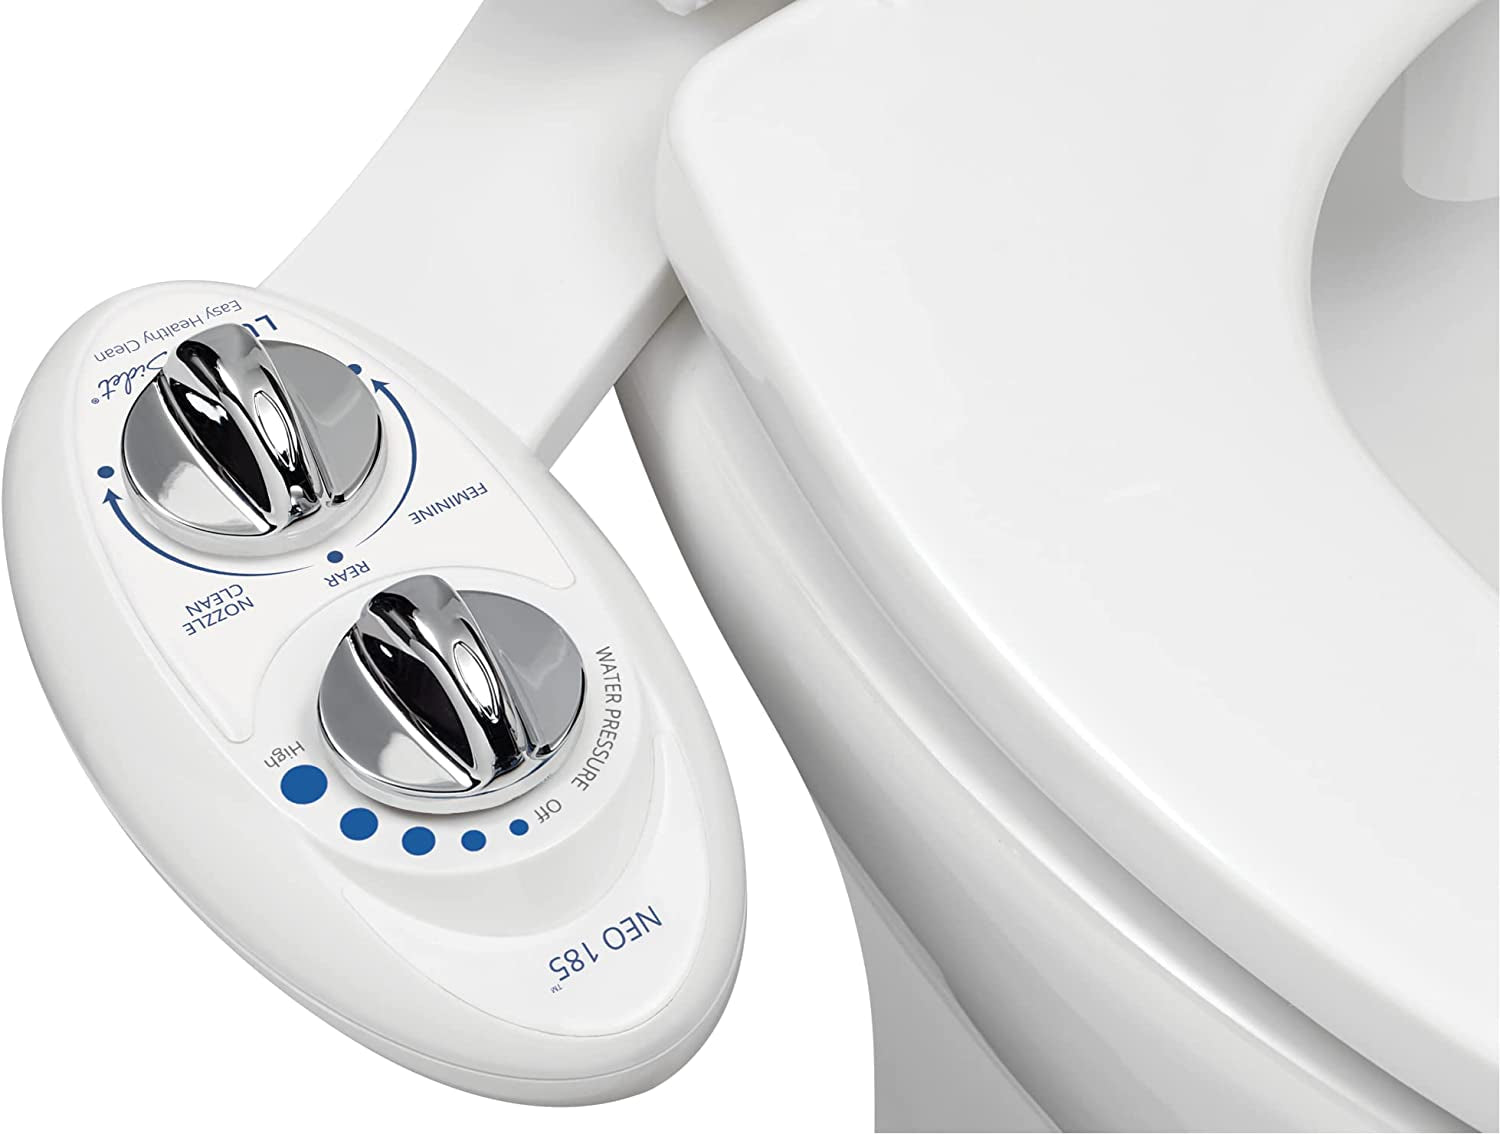 LUXE Bidet, LUXE Bidet Neo 185 (Elite) Non-Electric Bidet Toilet Attachment W/Self-Cleaning Dual Nozzle and Easy Water Pressure Adjustment for Sanitary and Feminine Wash (Blue and White) 13.5 X 7 X 3 Inches